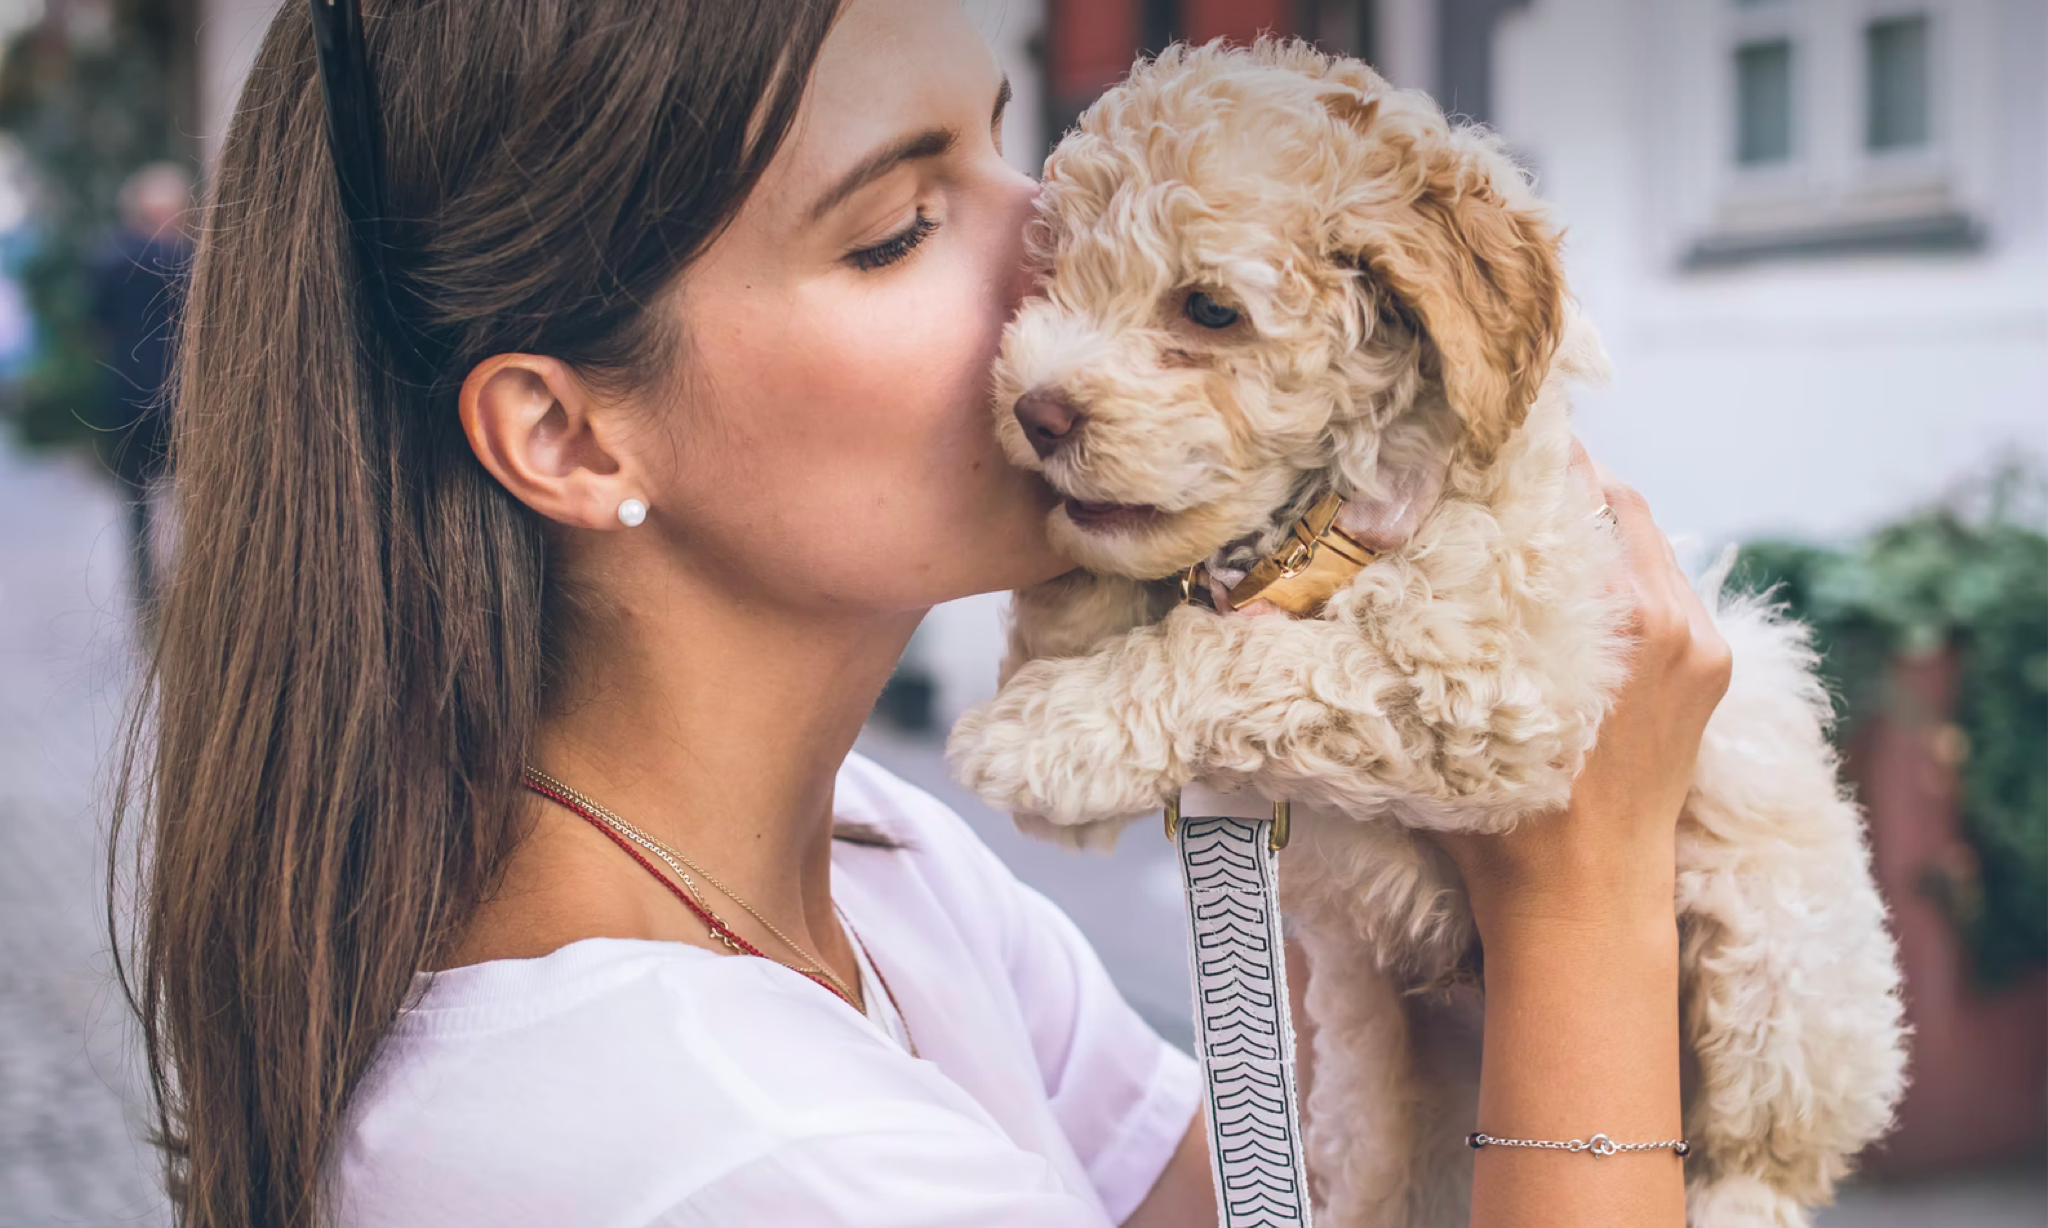 Building Engagement with your Dog